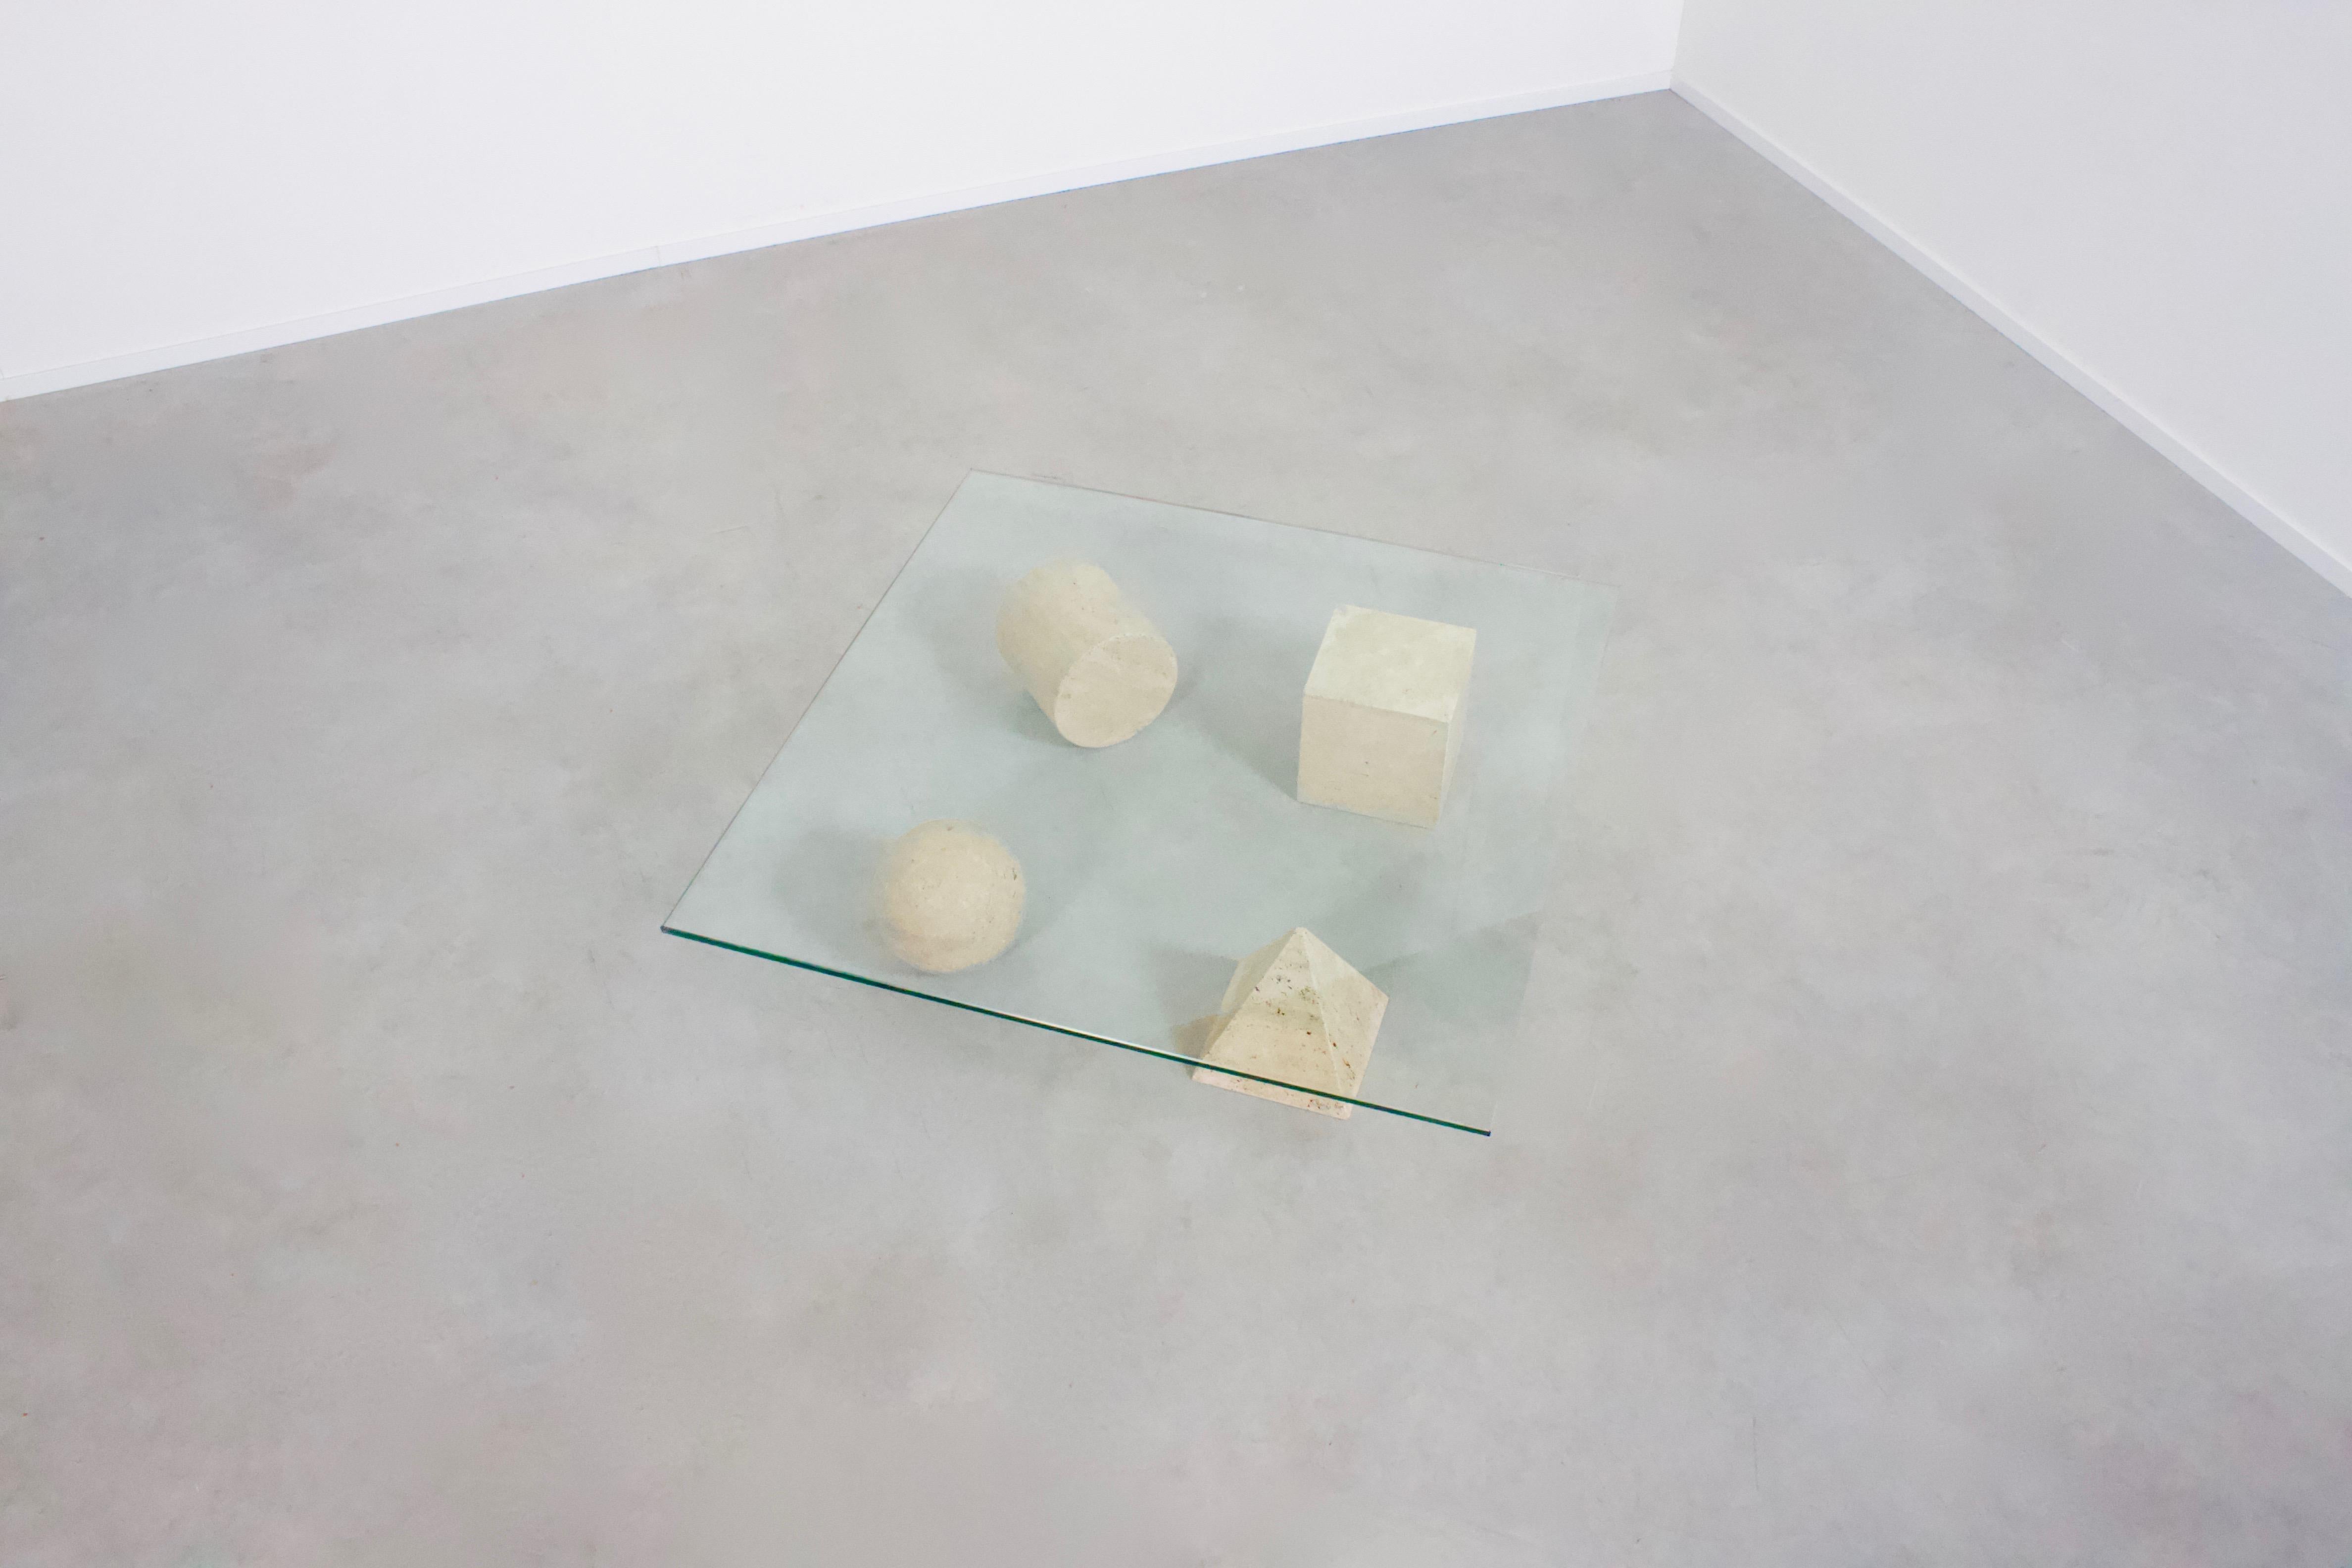 Mid-Century Modern 1970s Metaphora Coffee Table by Massimo and Lella Vignelli, Travertine and Glass